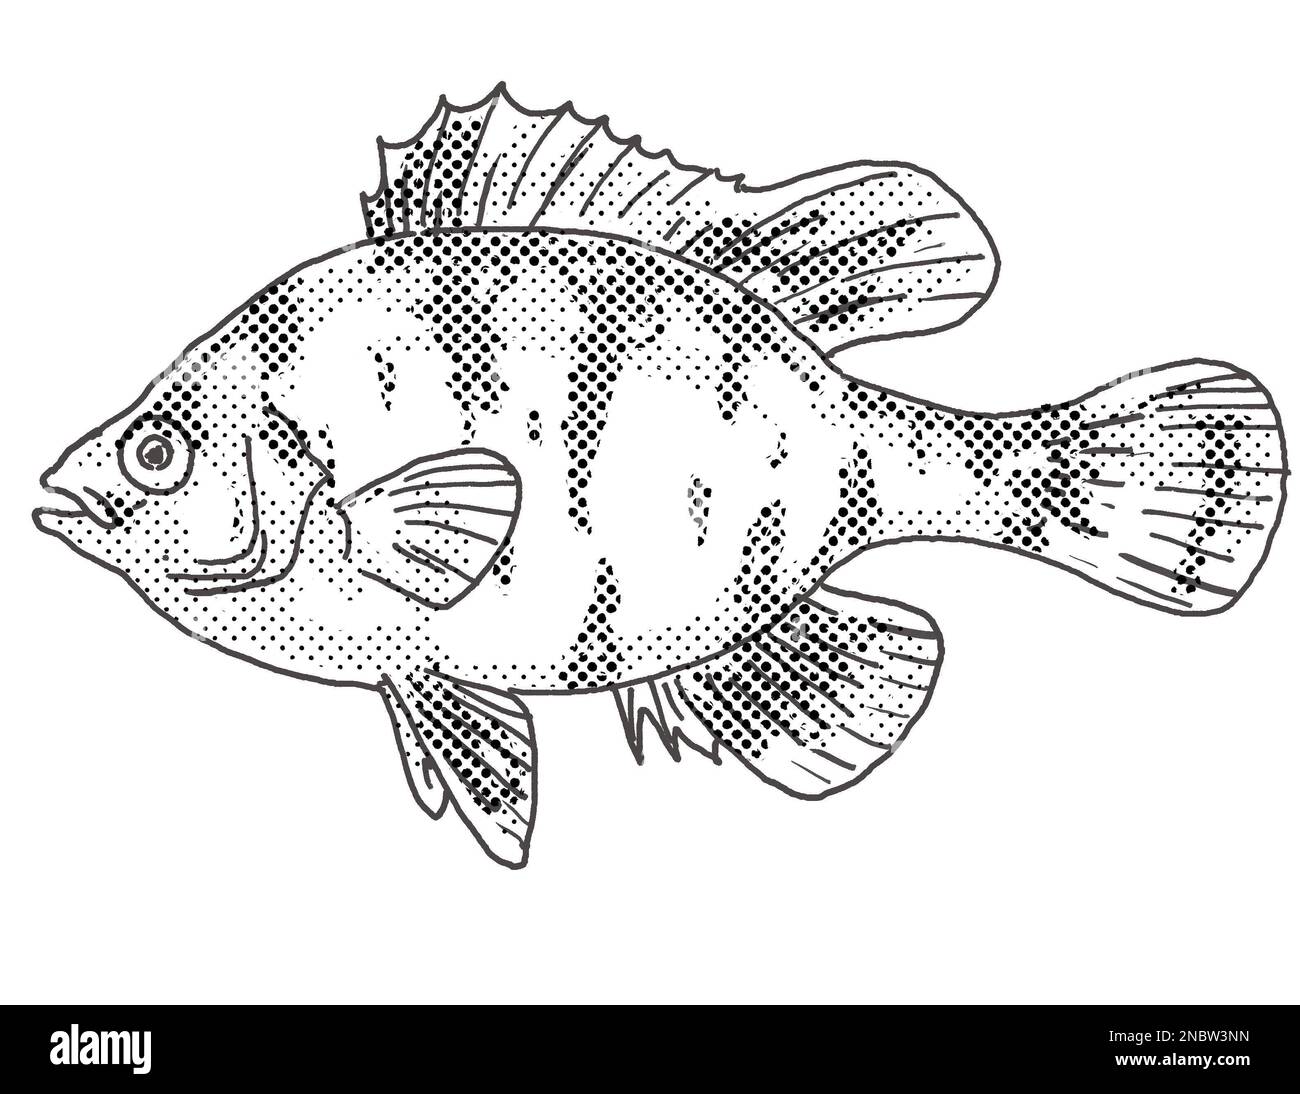 Cartoon style drawing of a blackbanded sunfish or Enneacanthus